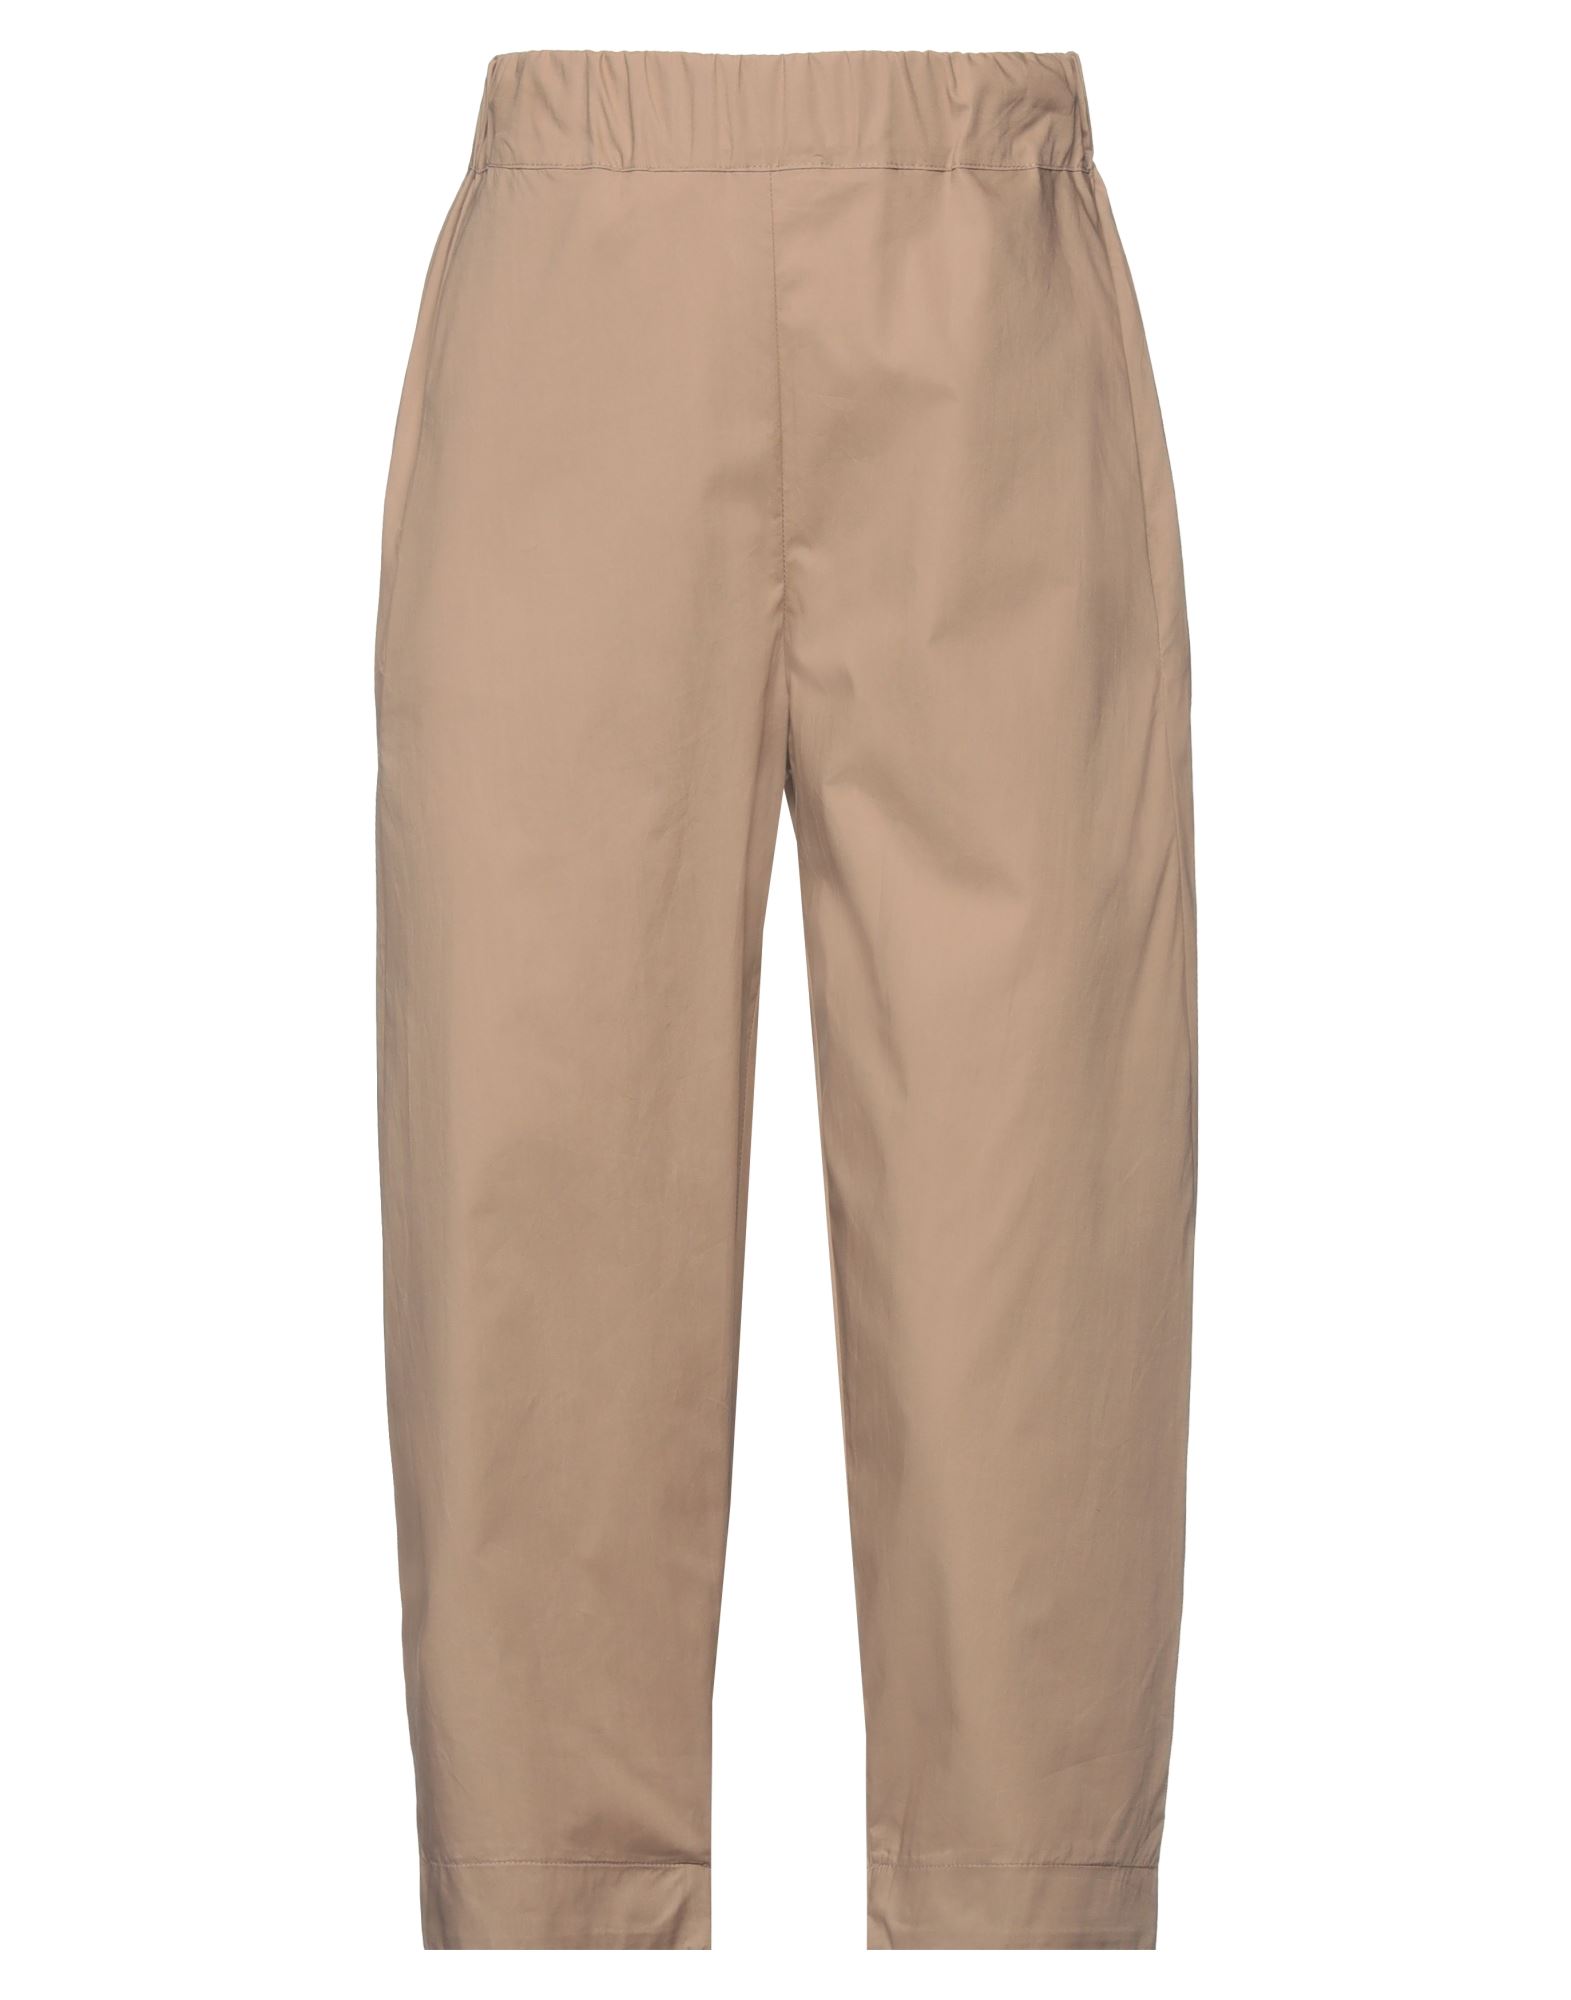 Collection Privèe Collection Privēe? Woman Cropped Pants Light Brown Size 4 Cotton In Beige